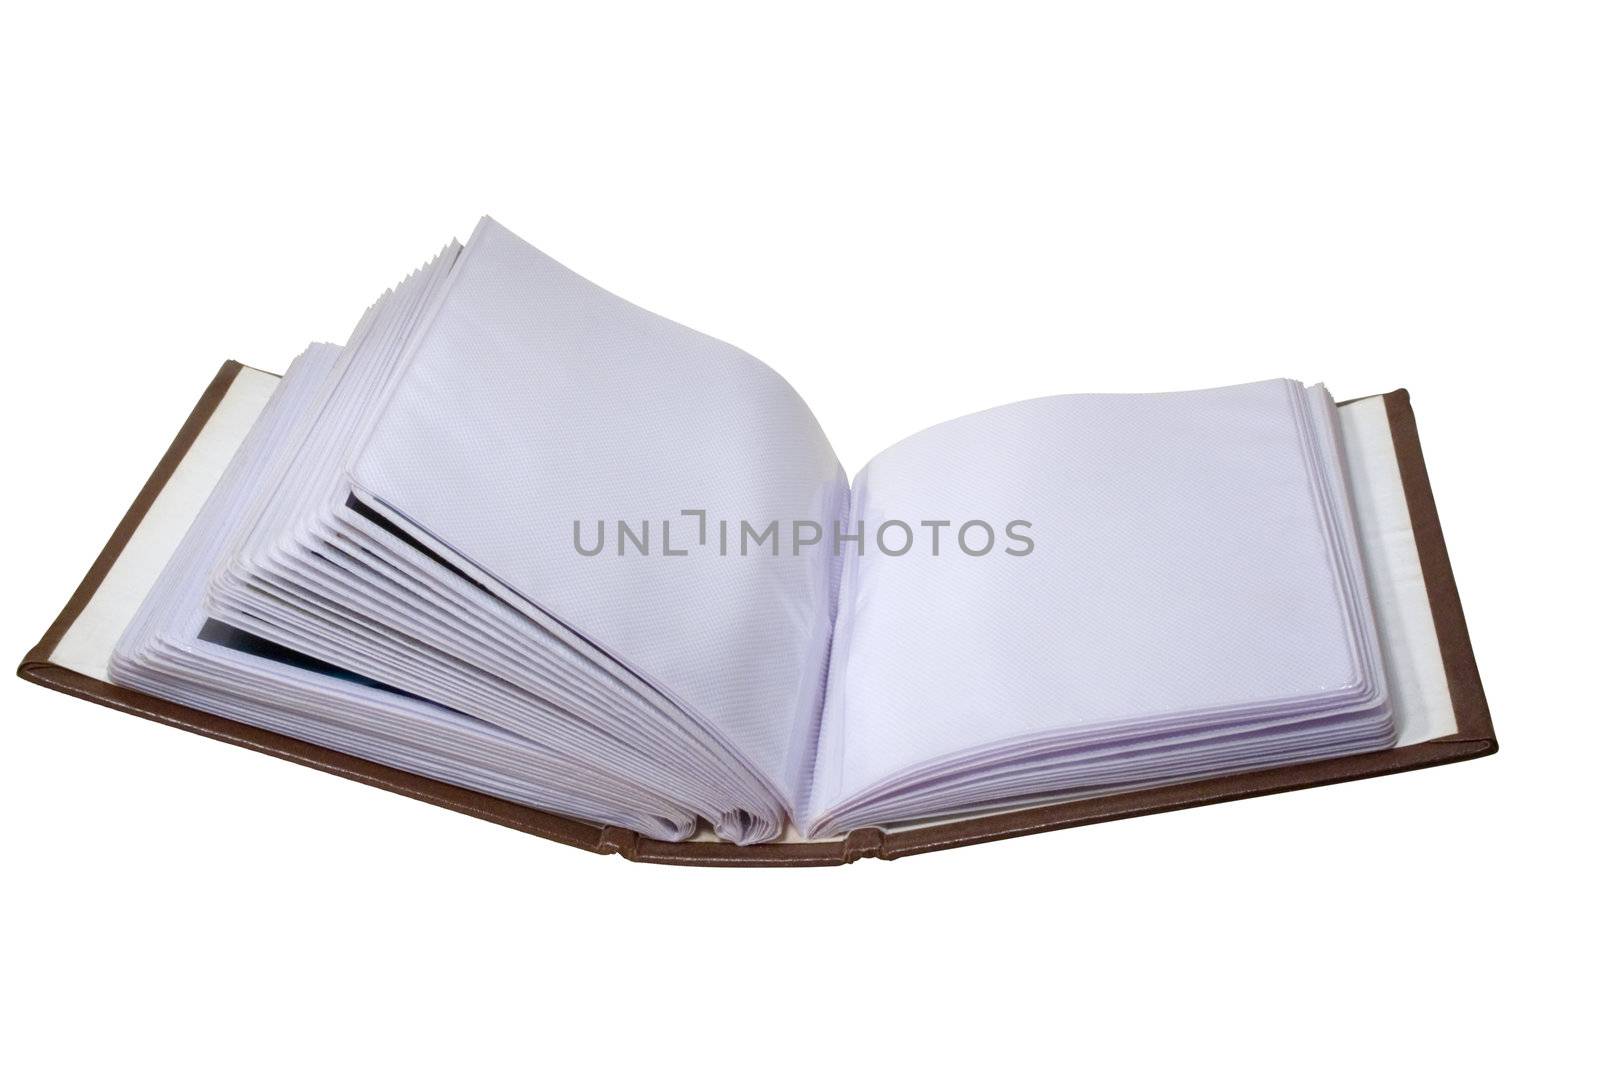 The opened brown photo album on white background. Close-up.